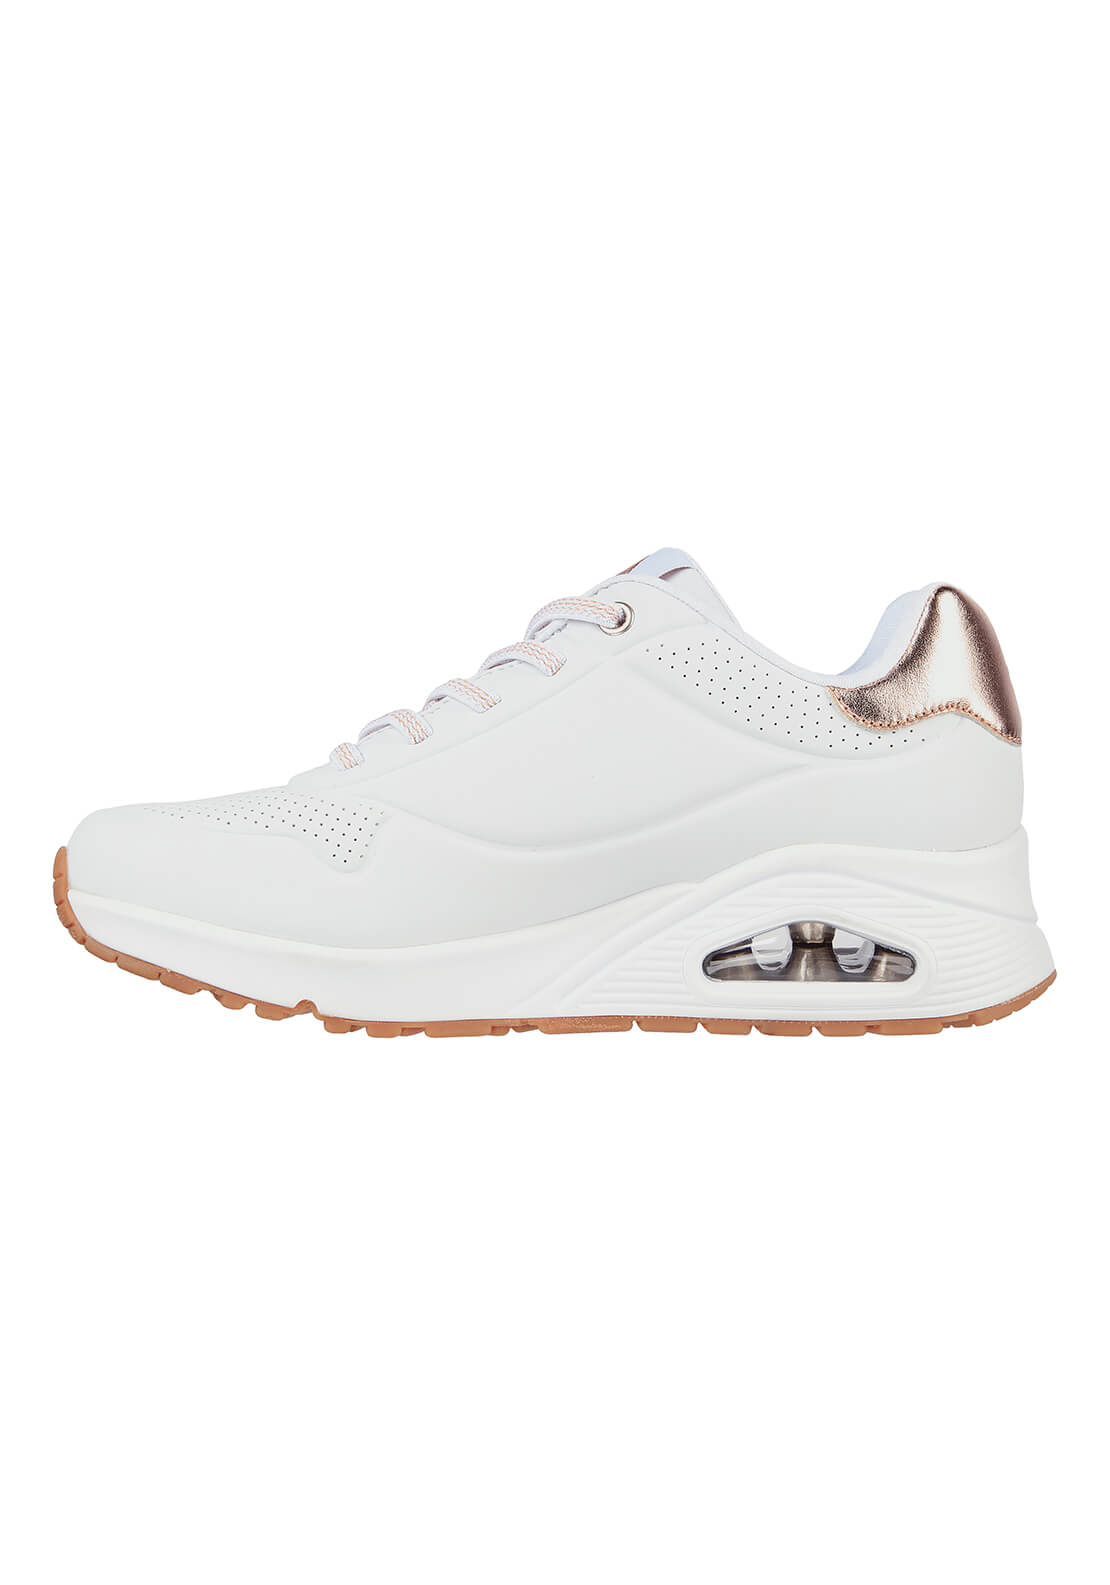 Skechers Street Uno Shimmer Away - White 3 Shaws Department Stores